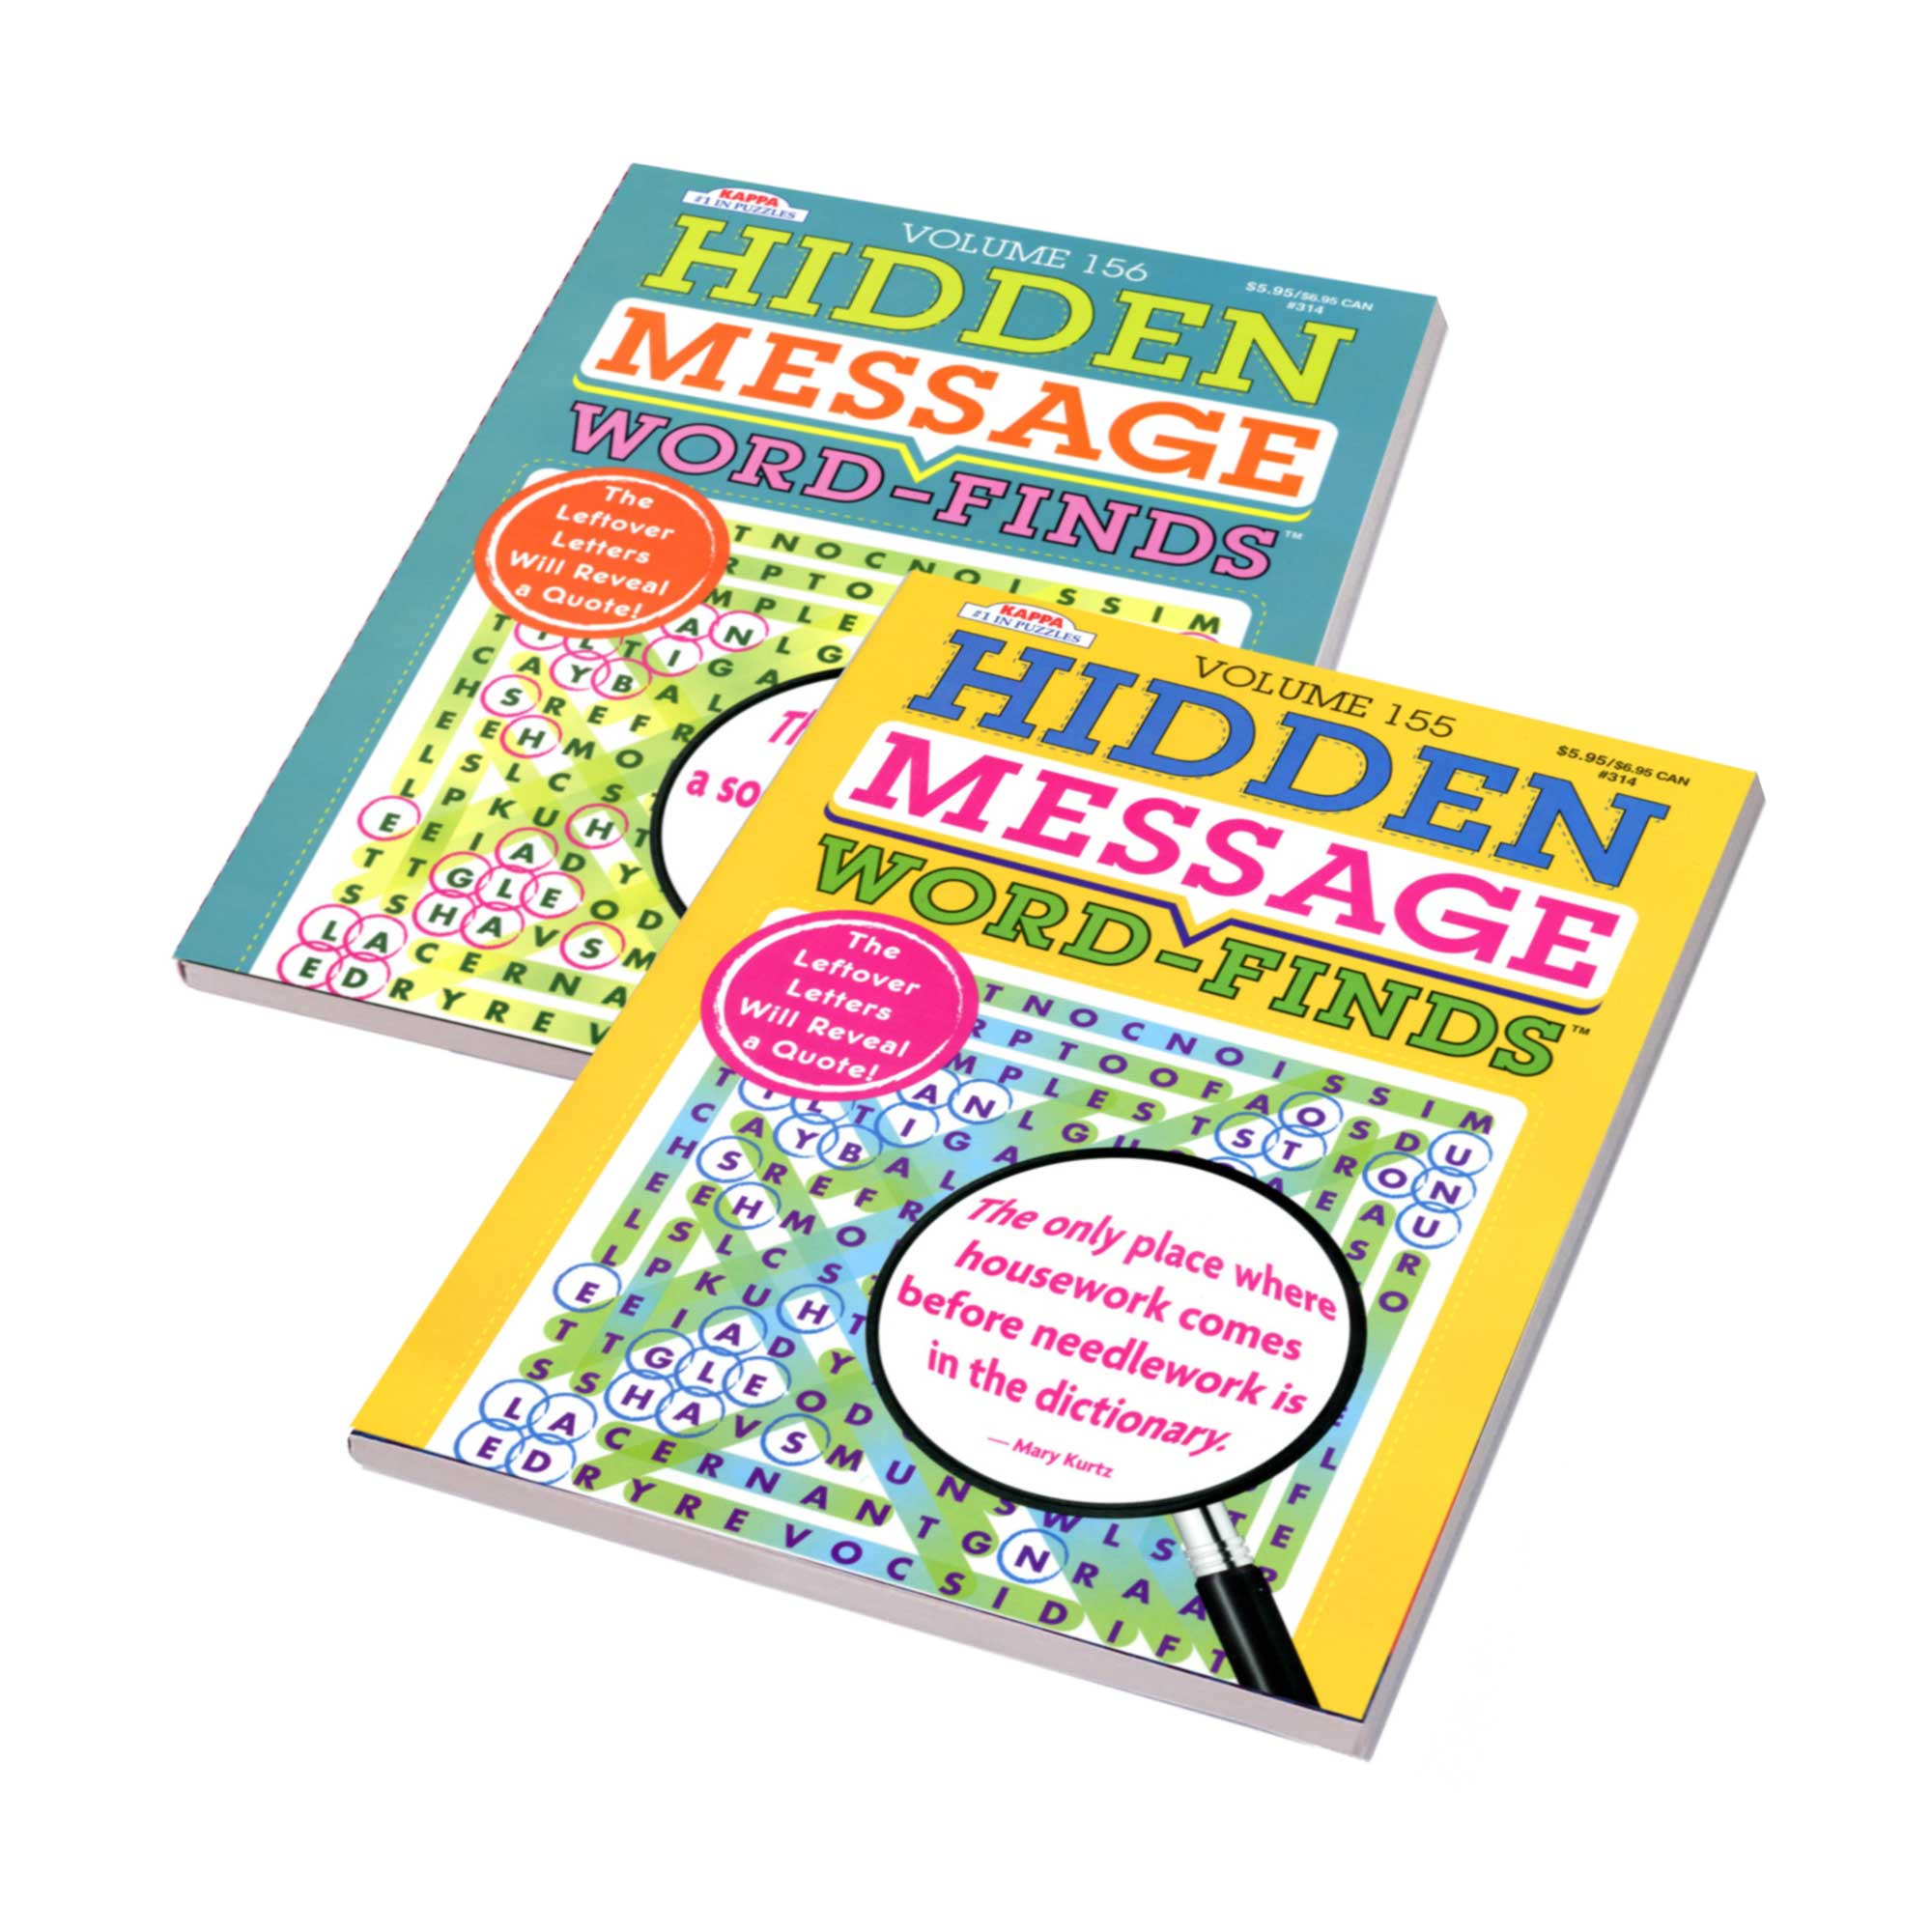 Puzzle Book | KAPPA Hidden Message Word Finds Book | 2-Titles